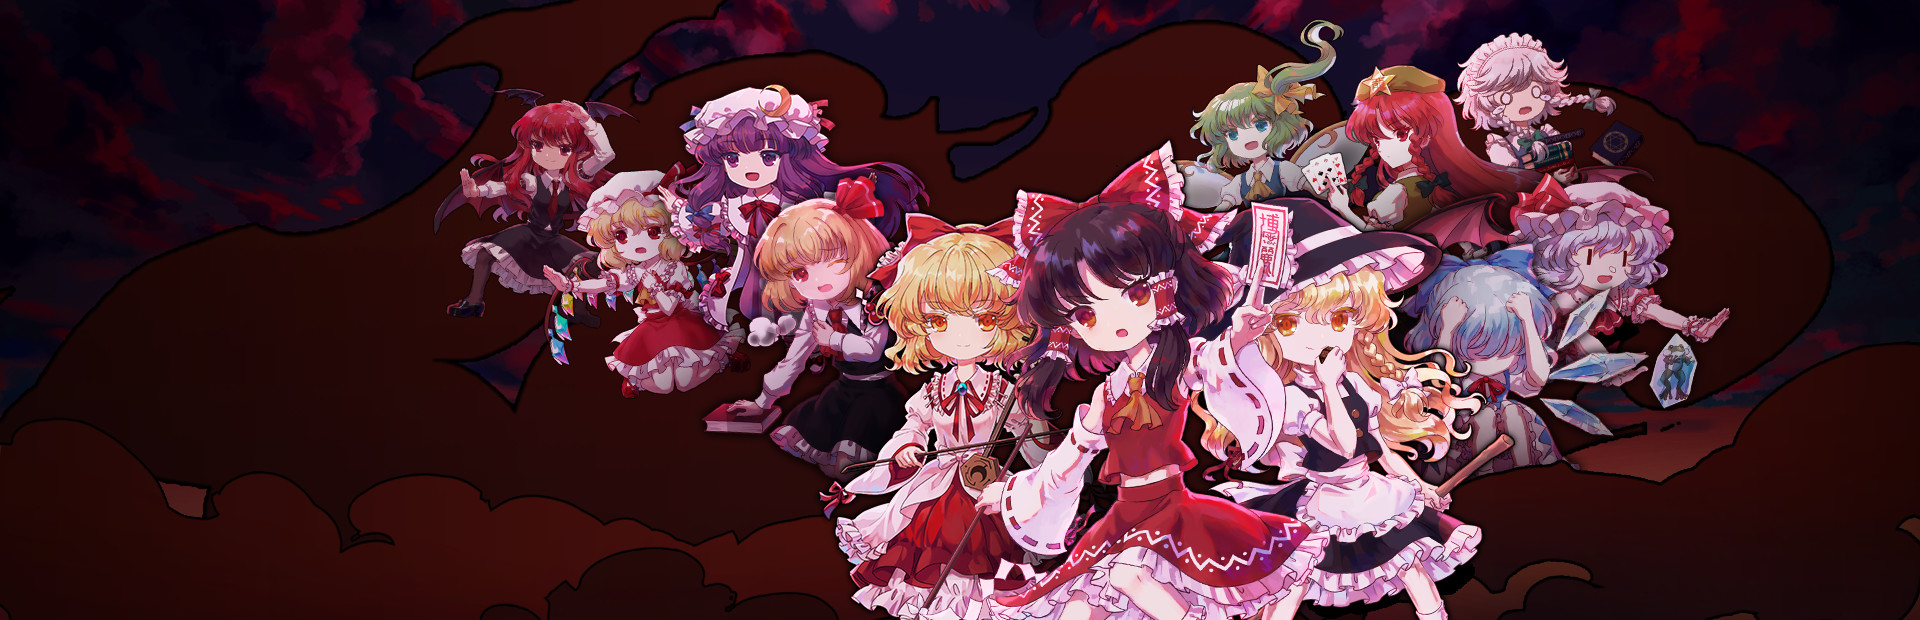 Touhou Blooming Chaos cover image